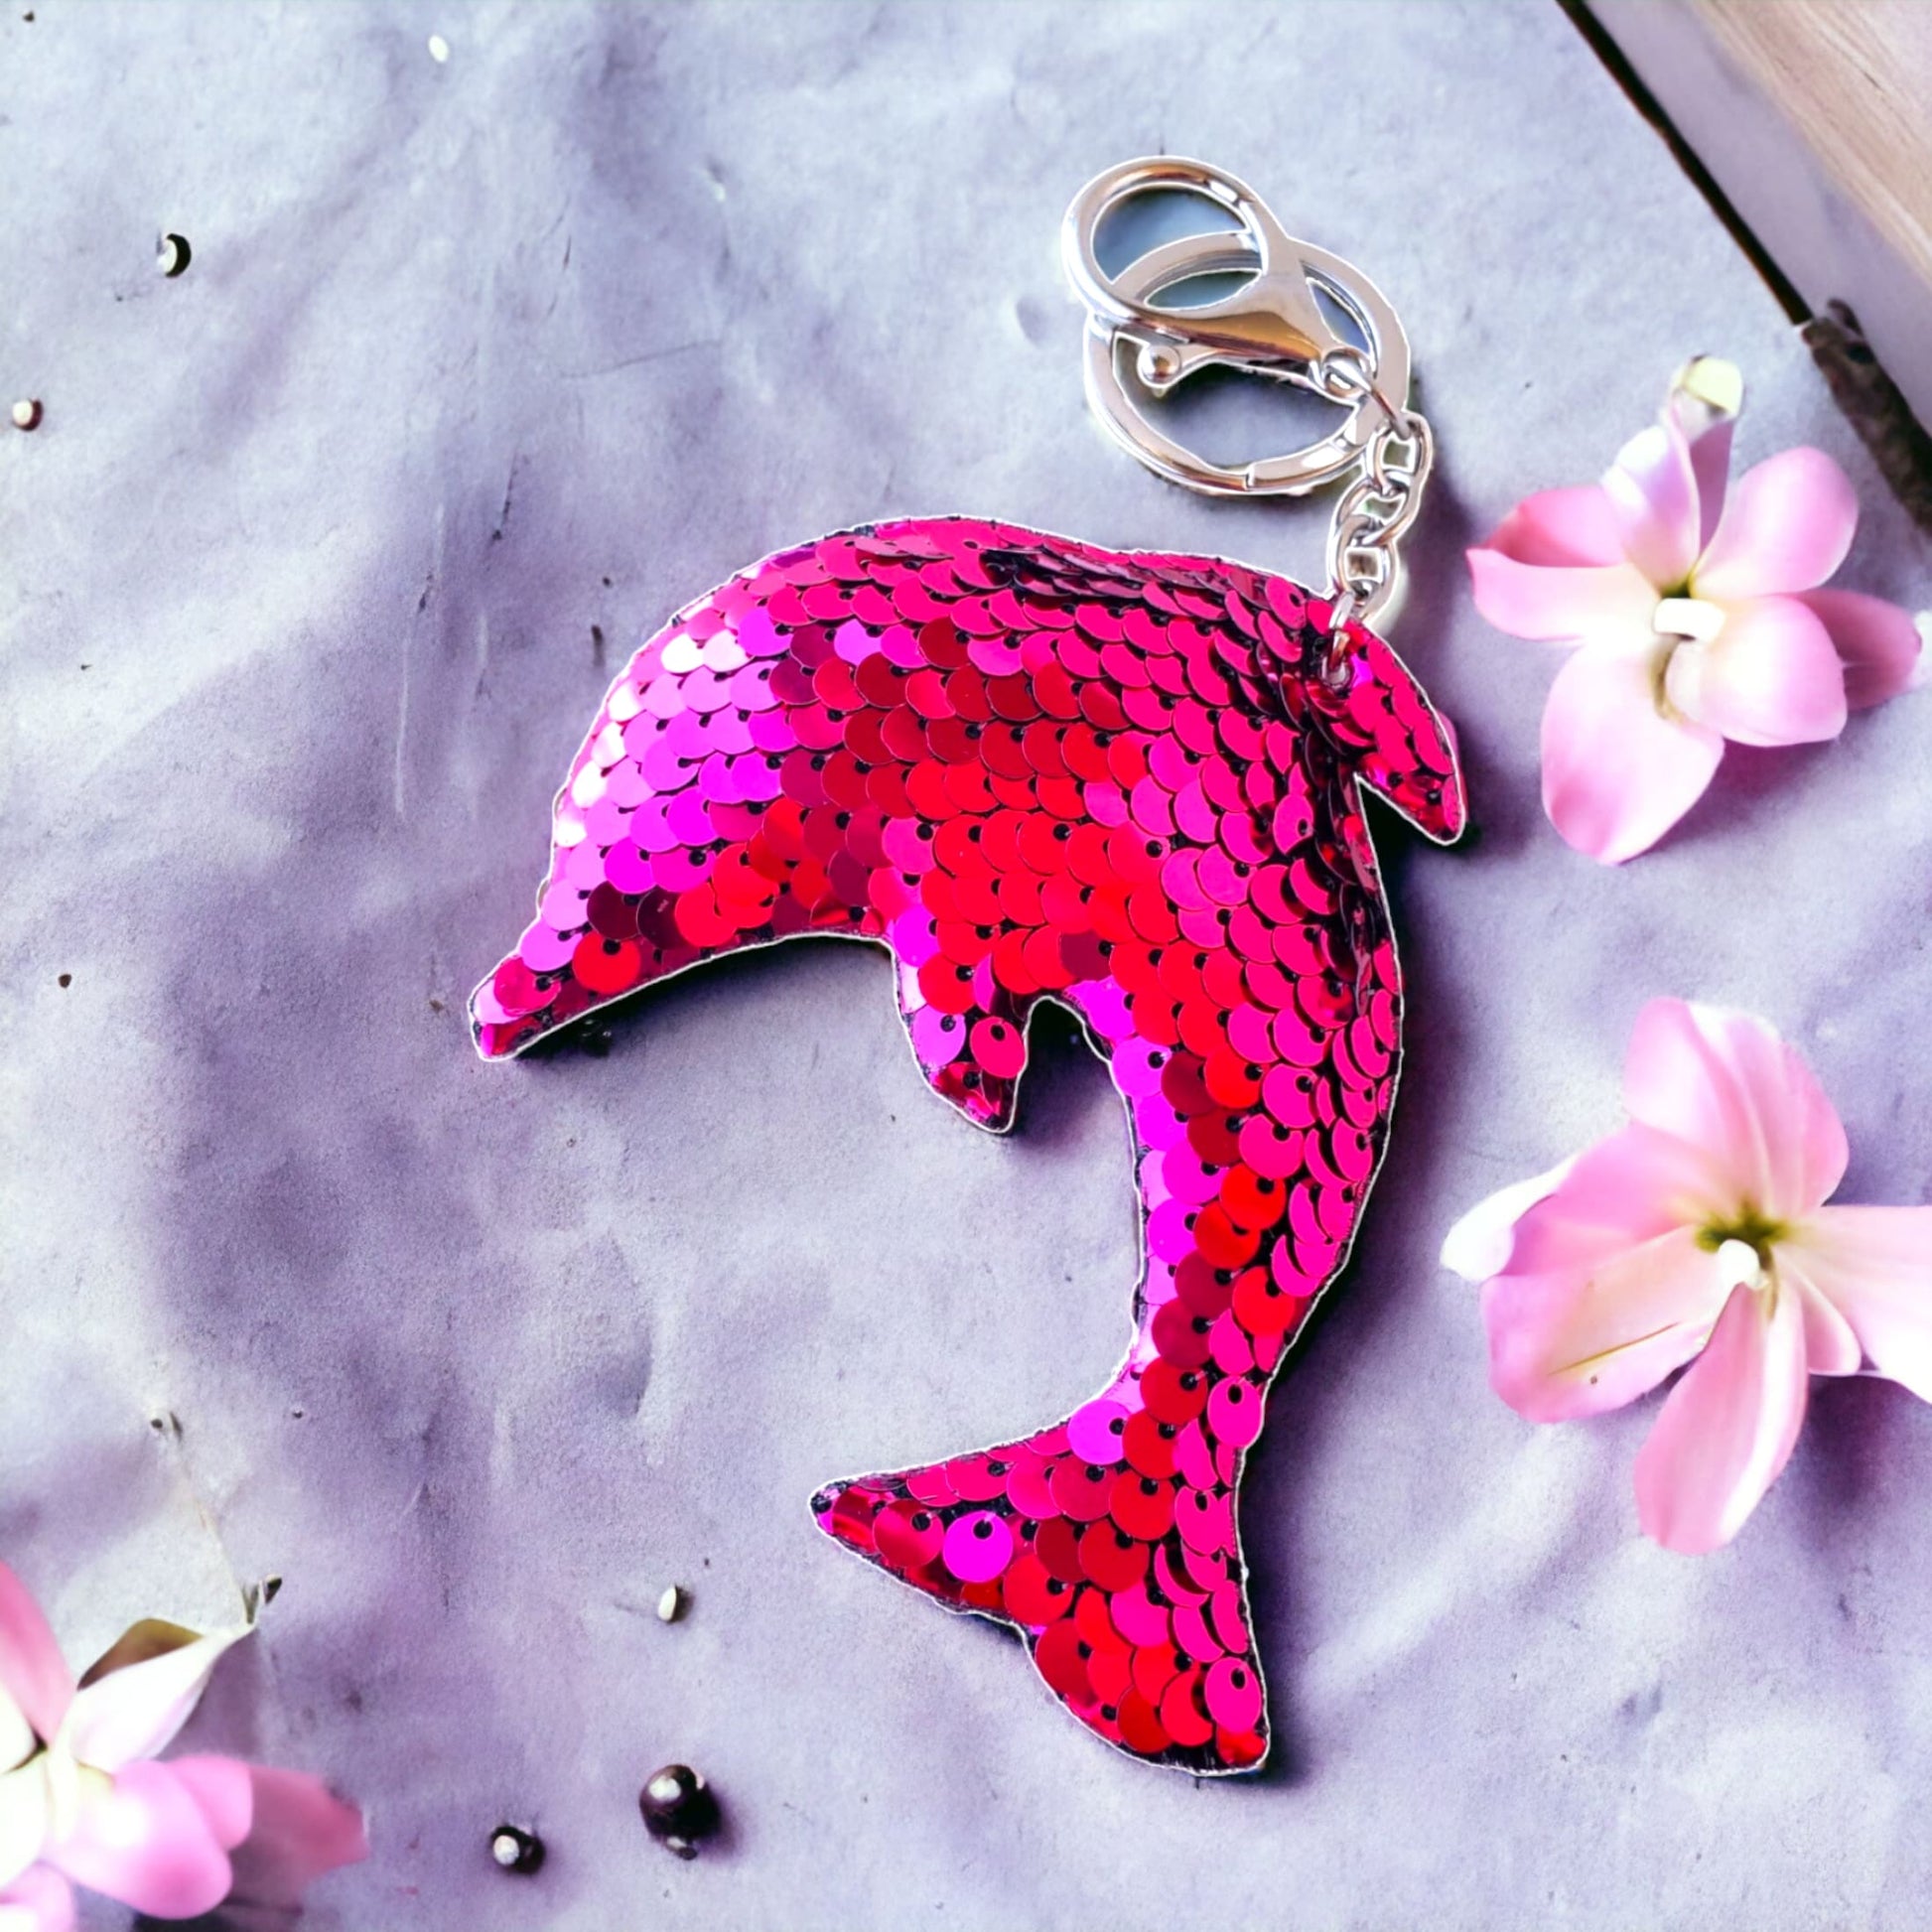 Sequin Dolphin Bag Charm Keychain from Confetti Kitty, Only 2.99